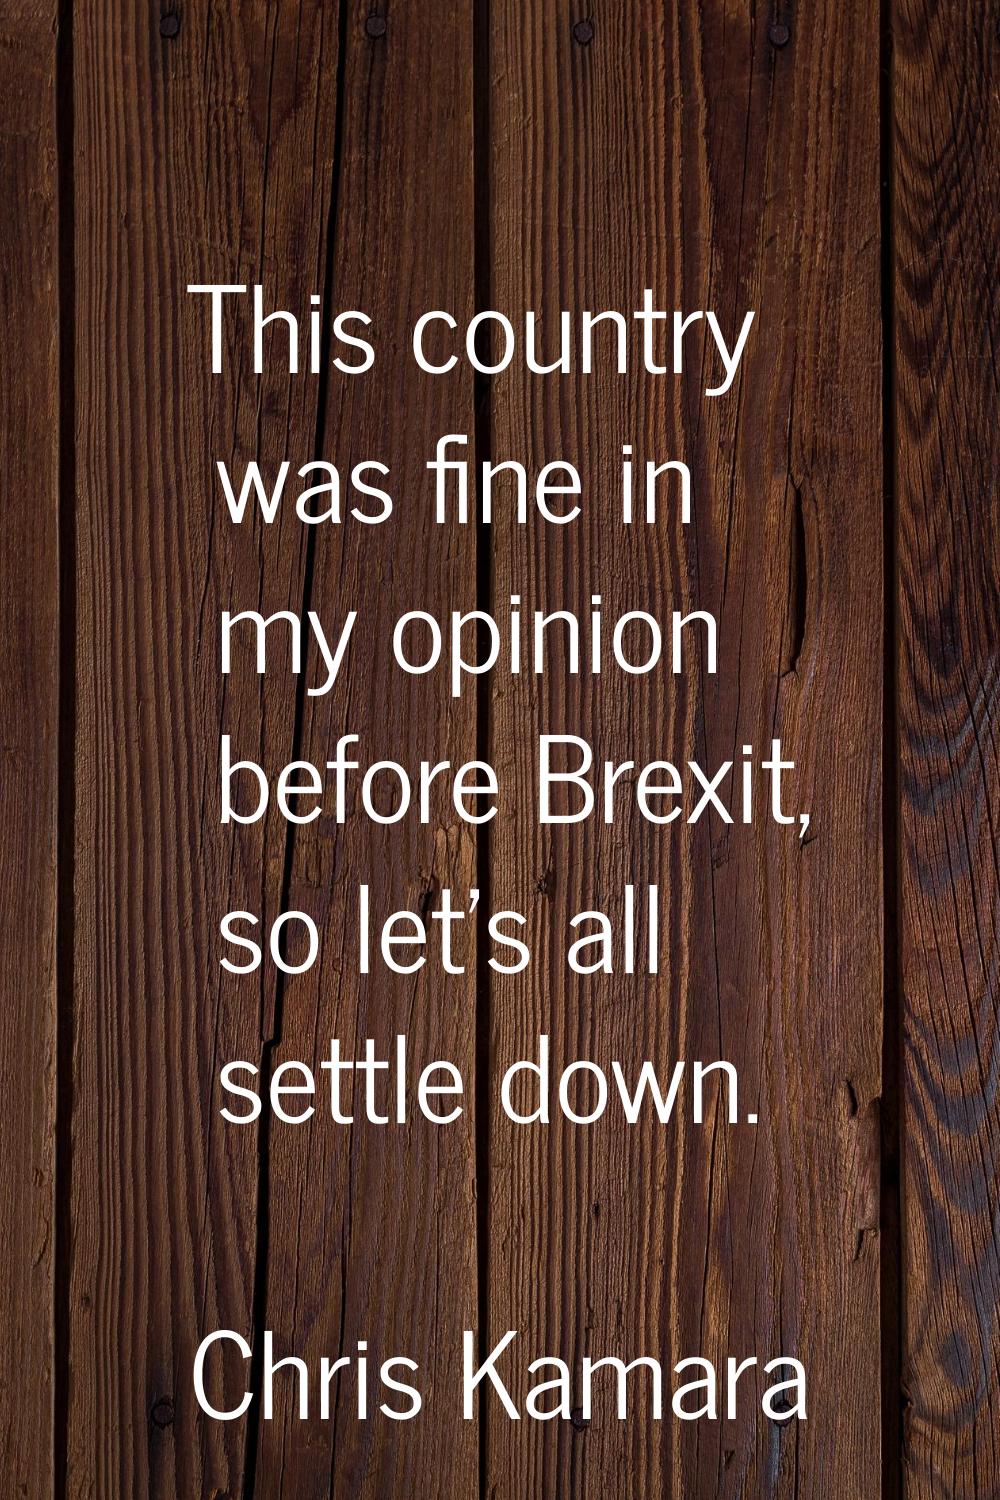 This country was fine in my opinion before Brexit, so let's all settle down.